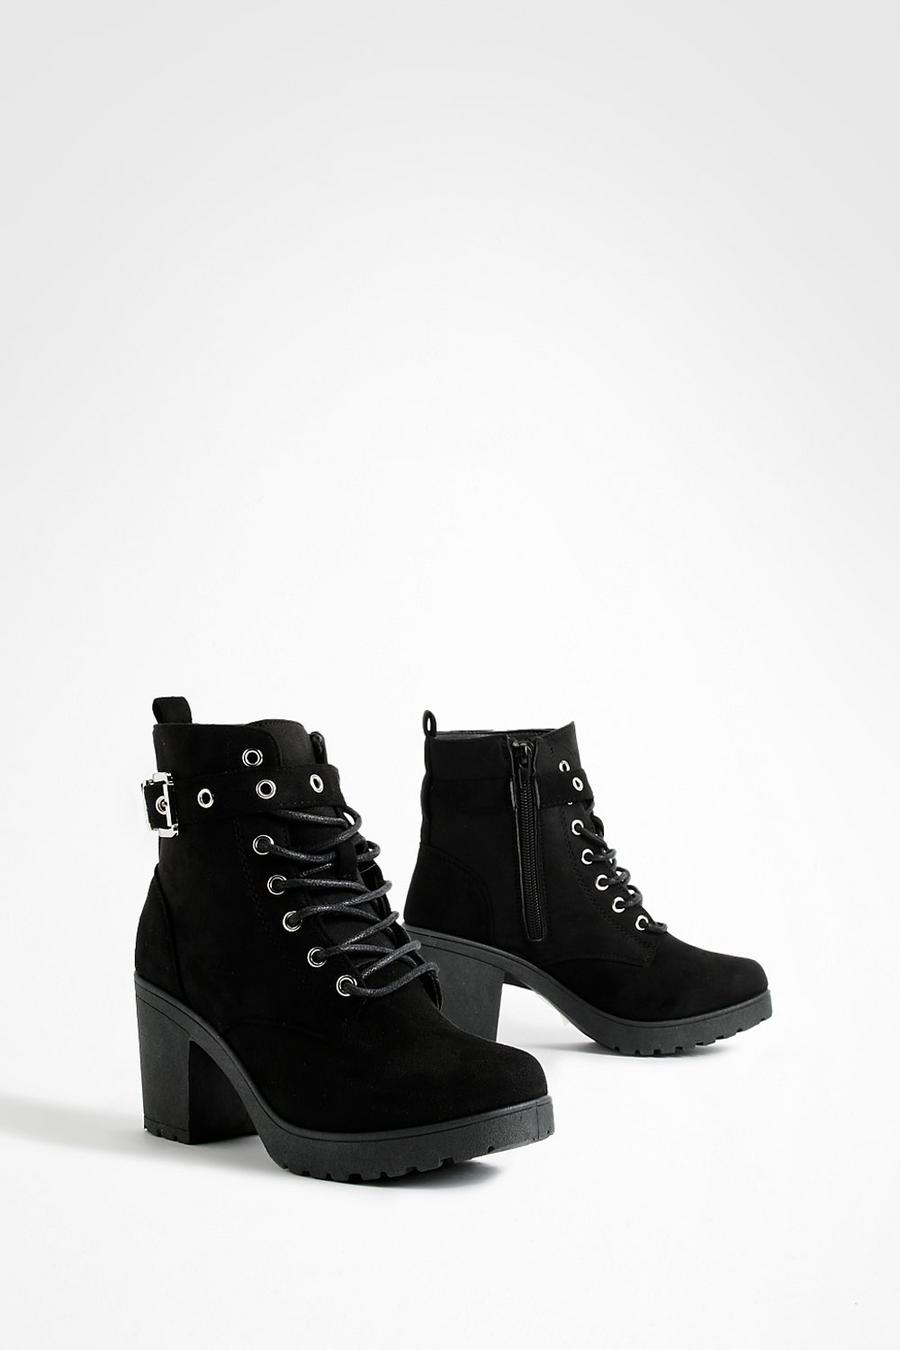 Black Buckle Lace Up Chunky Combat Boots